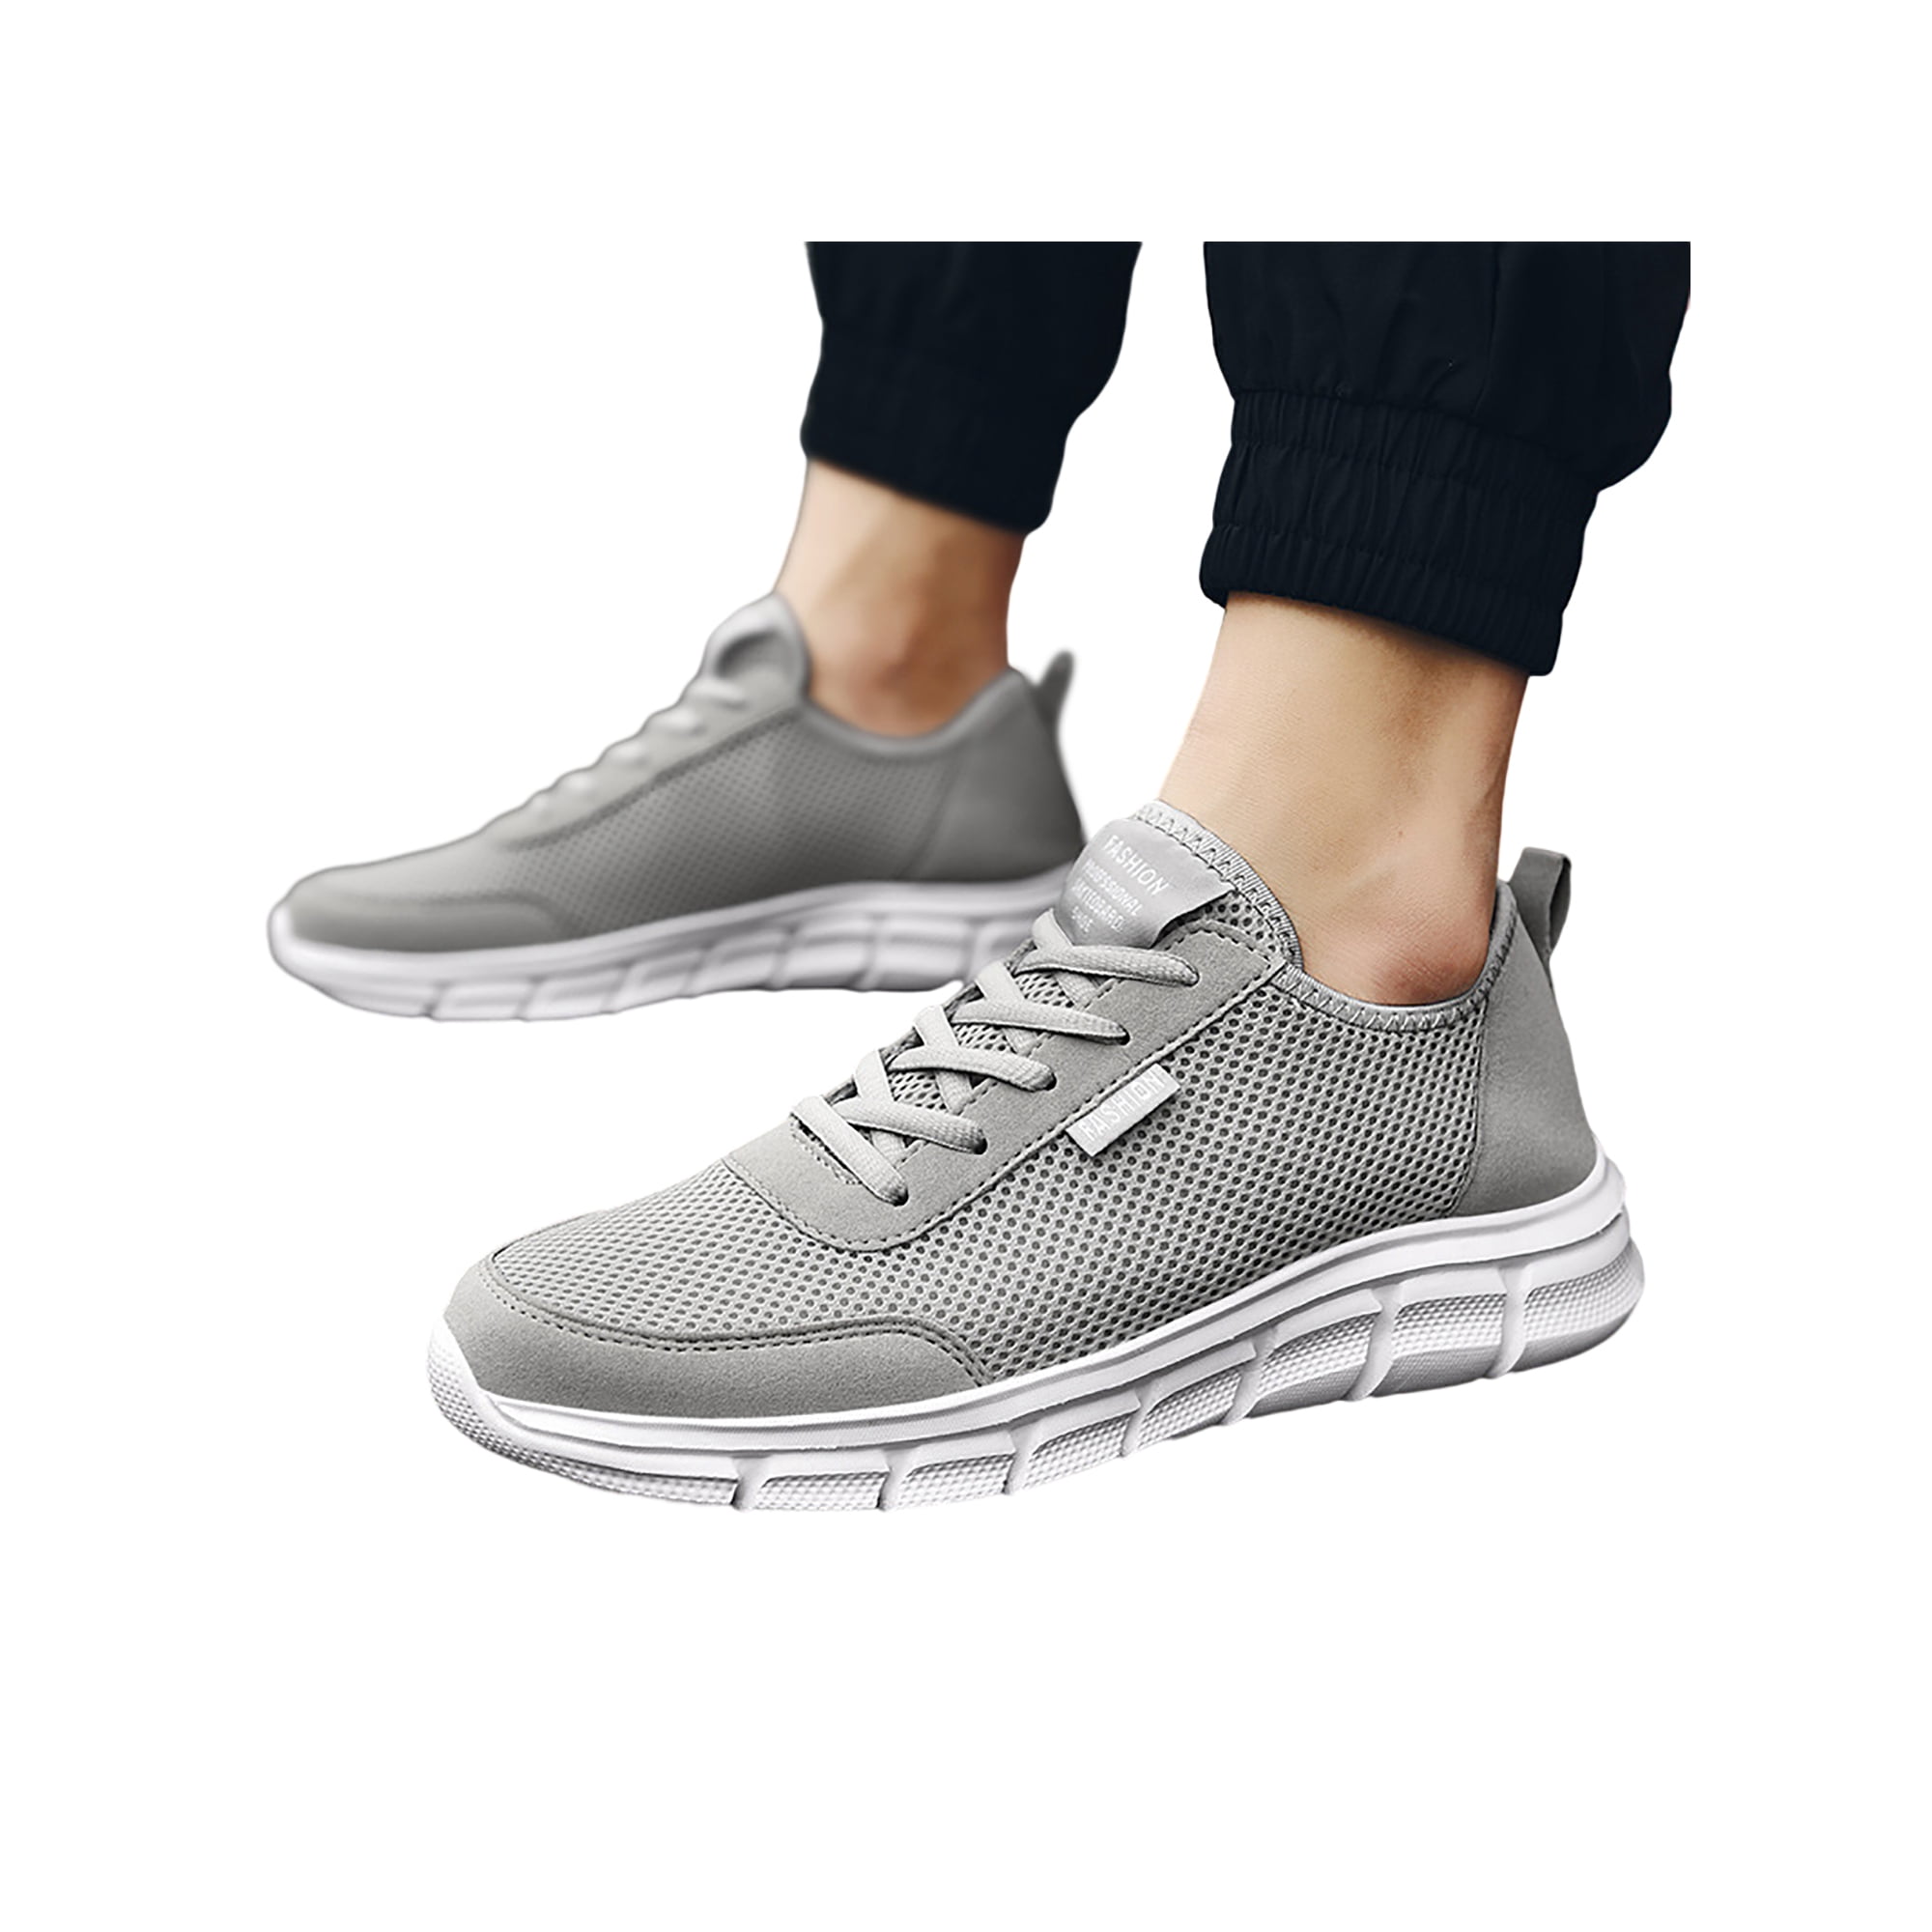 Woobling Men's Athletic Running Casual Sneakers Fashion Sports Tennis Shoes  Walking Gym 